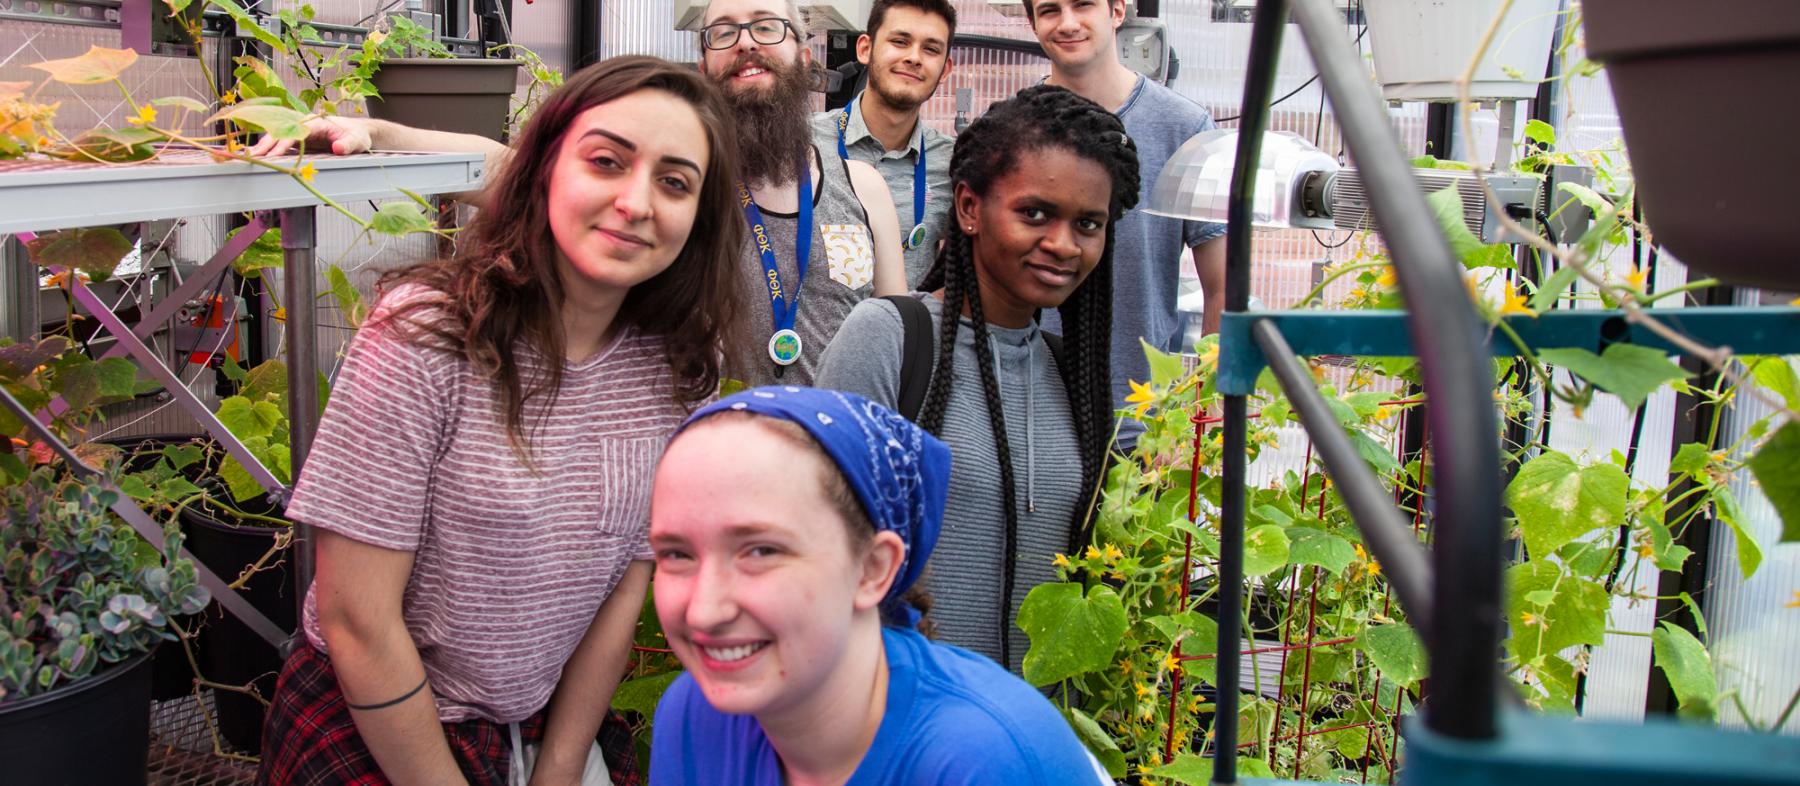 PTK students pose in the campus greenhouse